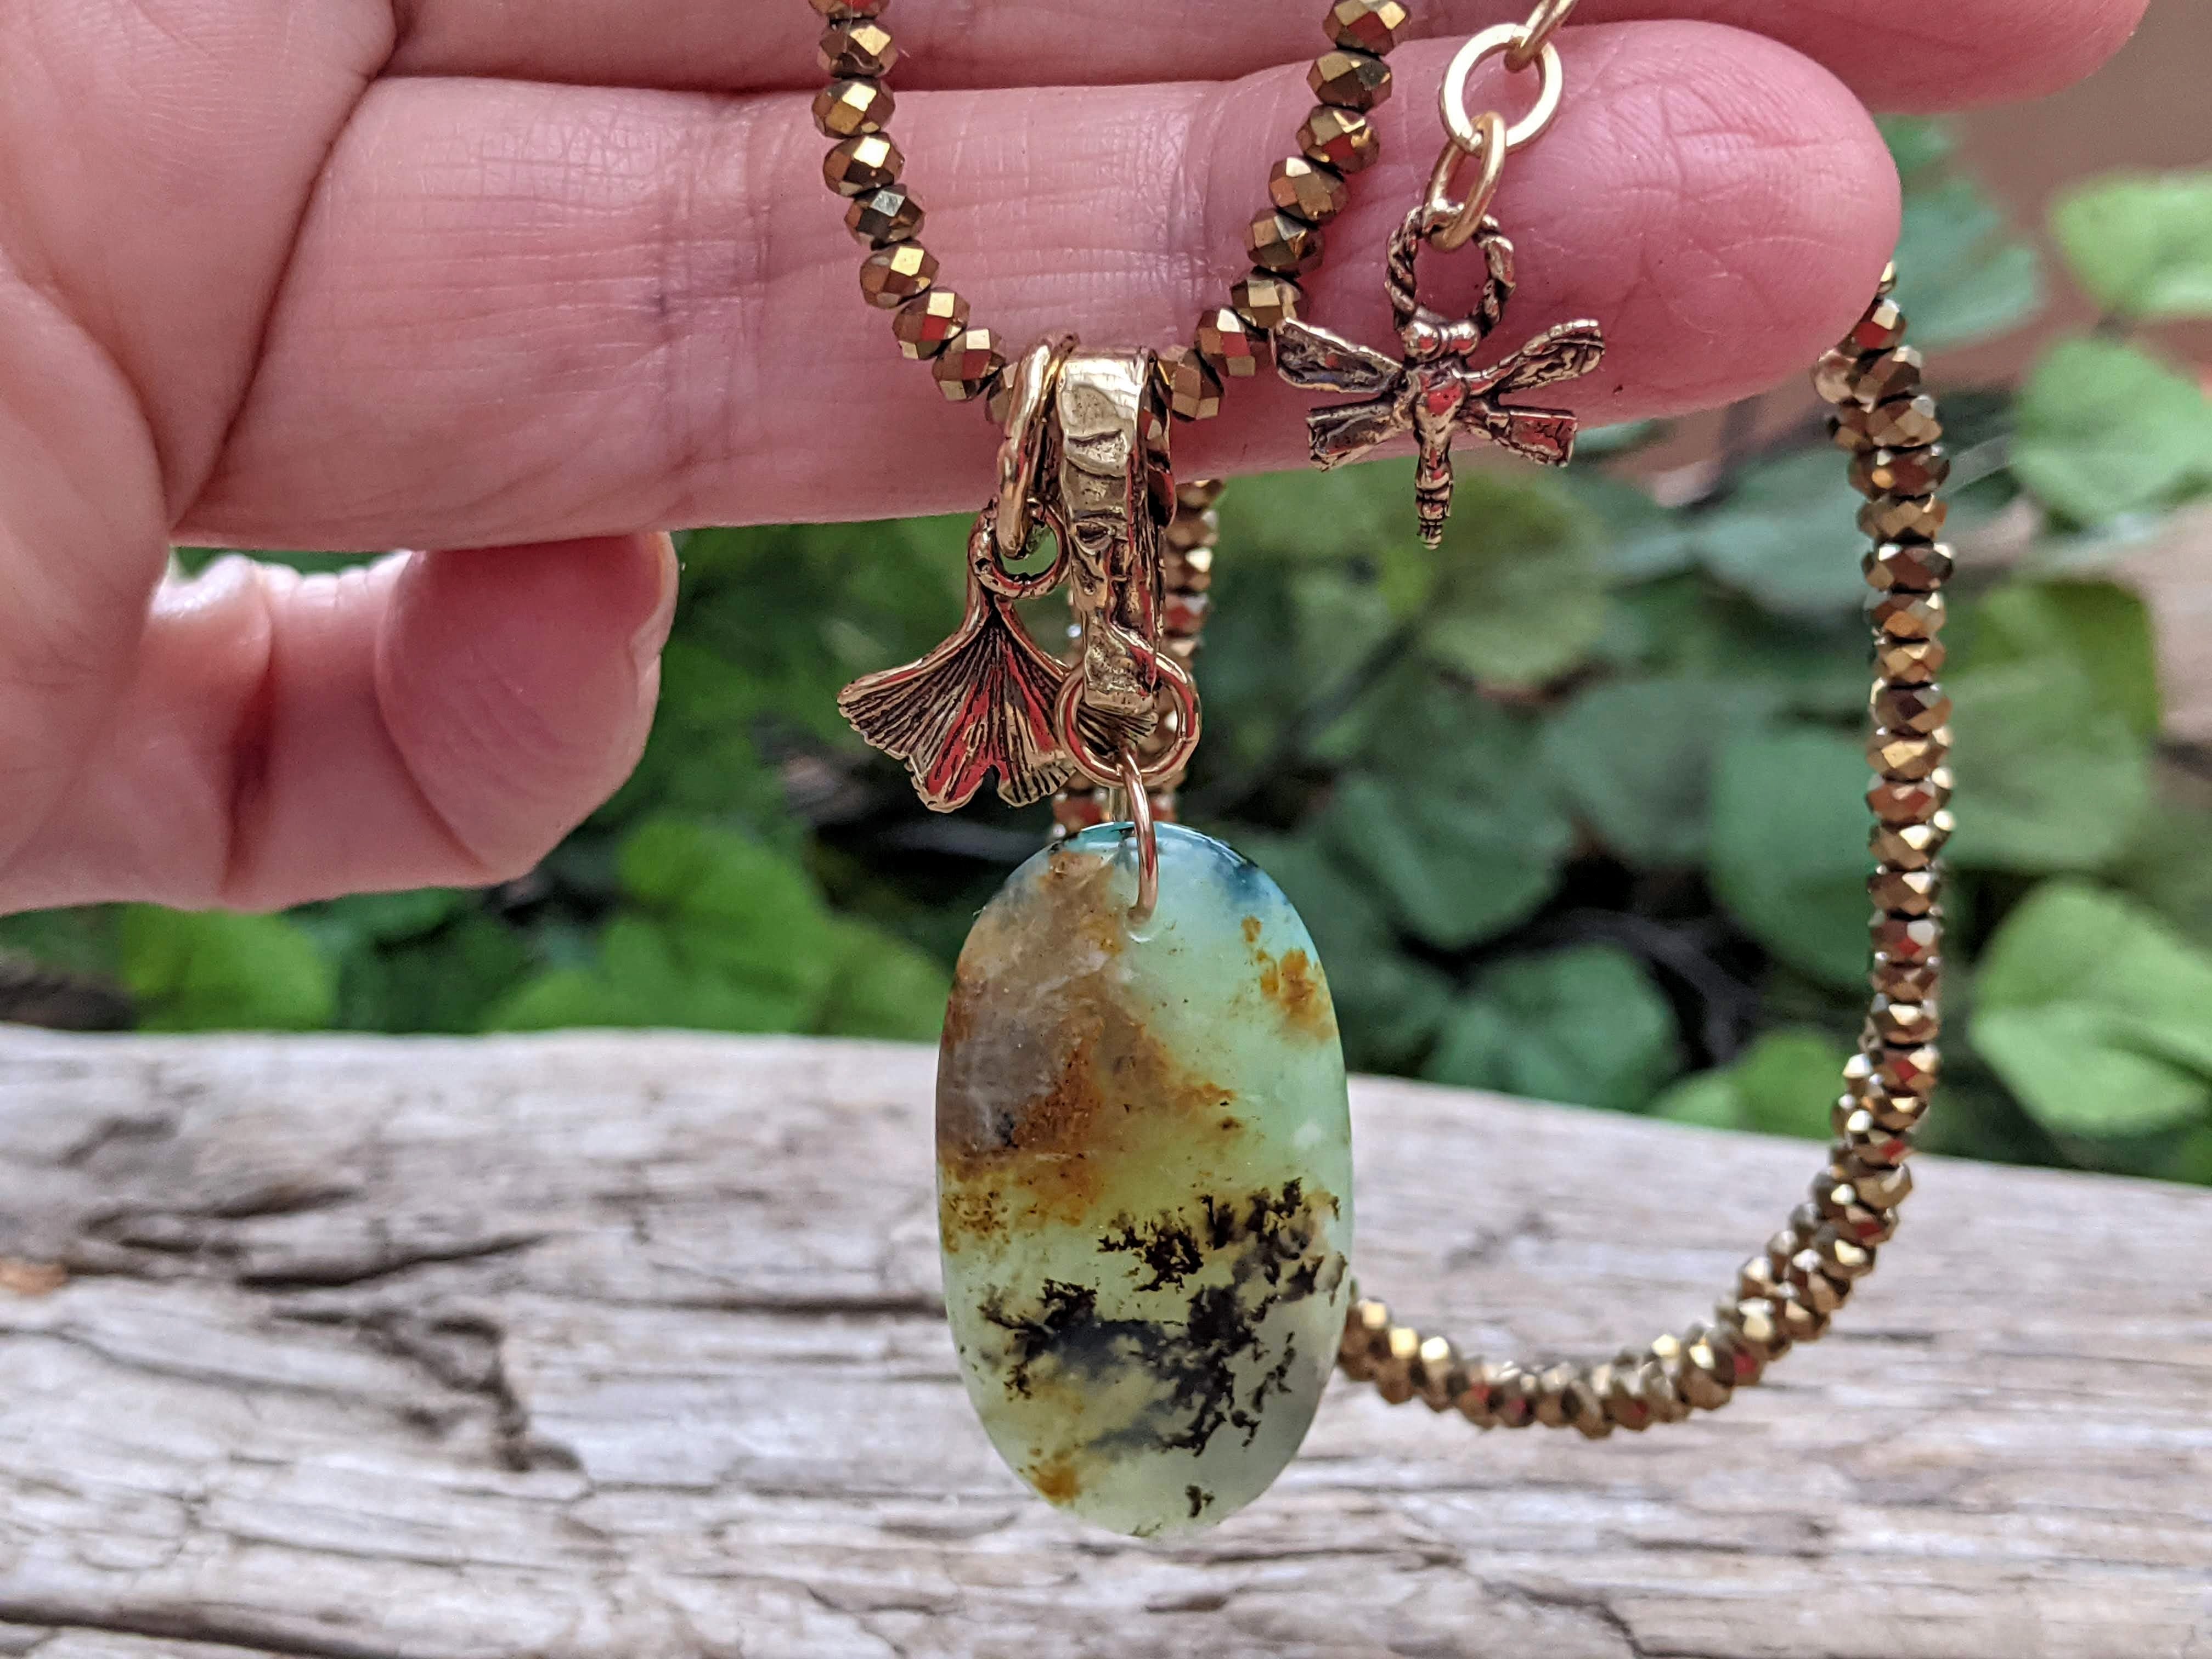 One-of-a-Kind Peruvian Blue Opal Necklace, Opal Pendant